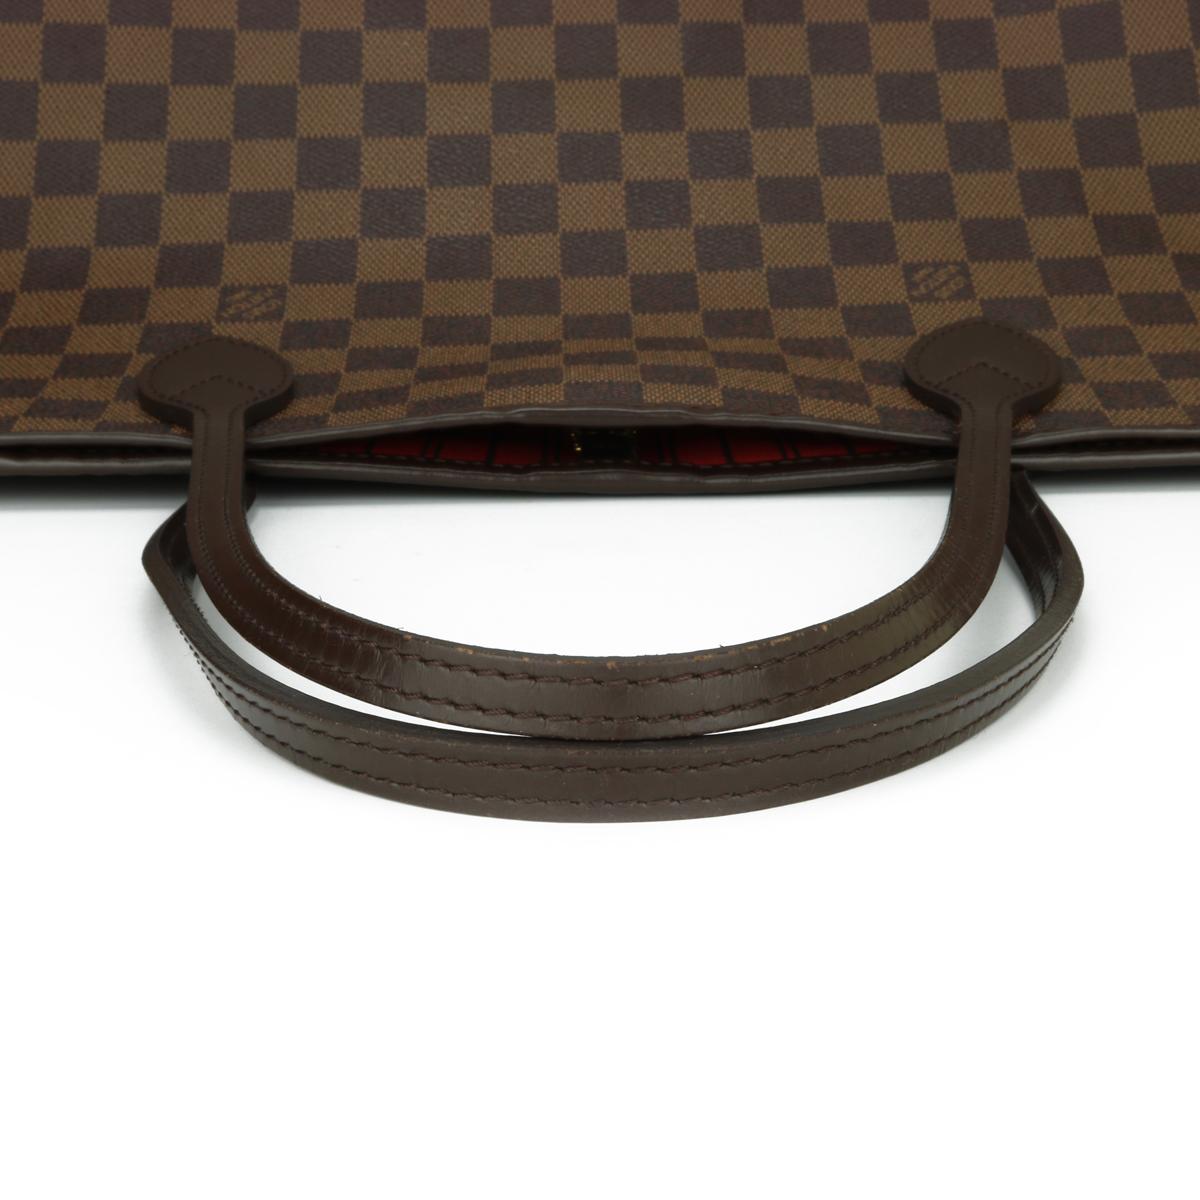 Louis Vuitton Neverfull GM Bag in Damier Ebène with Cherry Red Interior 2015 7